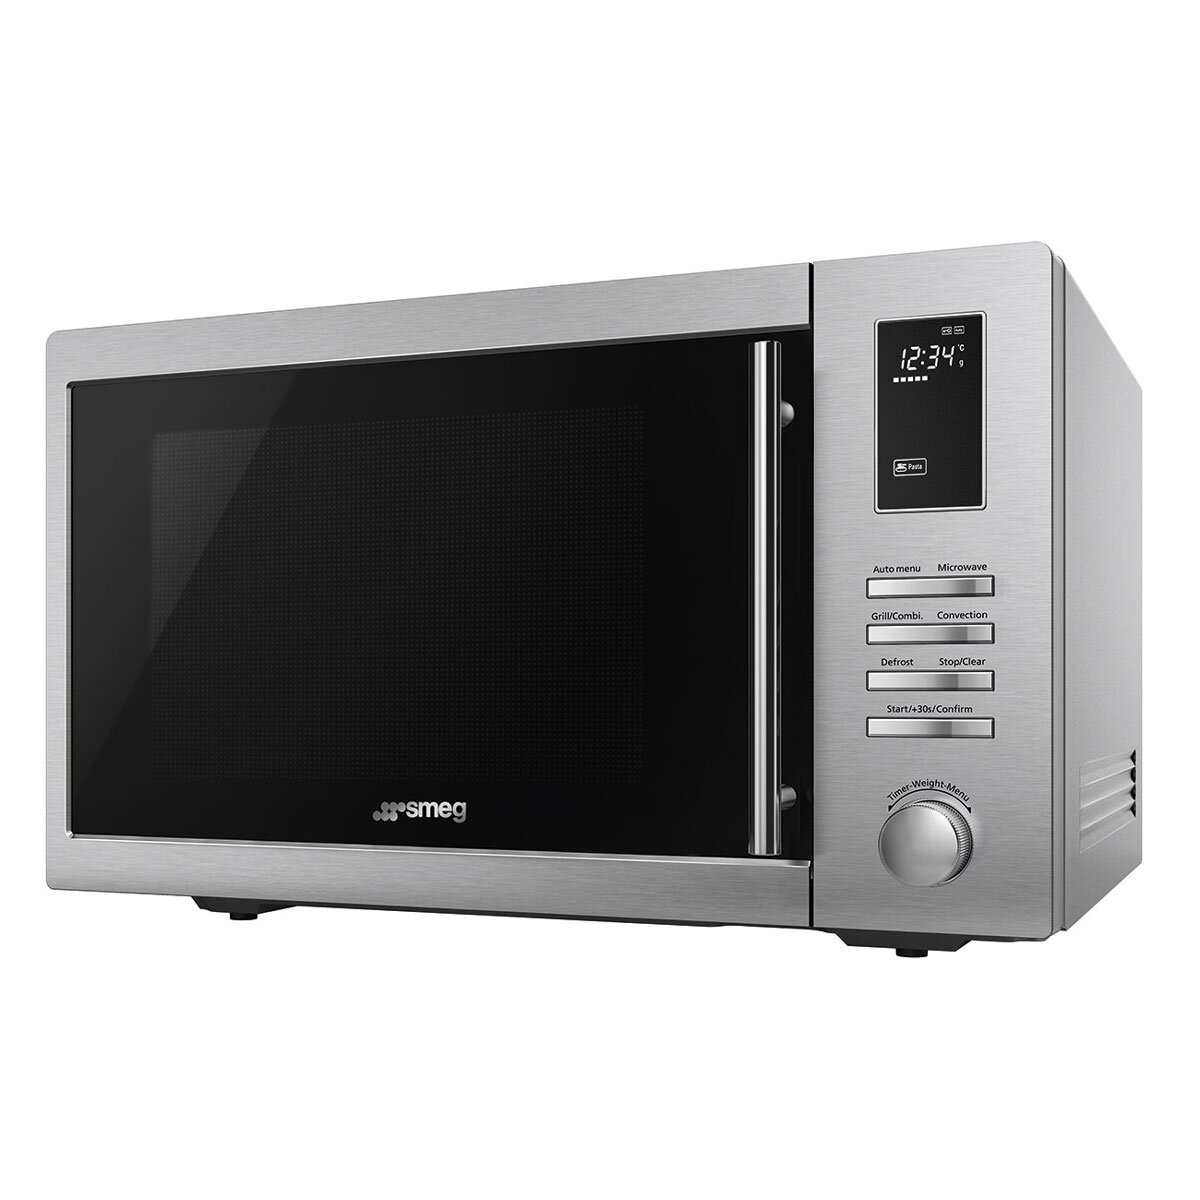 Image of Smeg microwave from 45 degree angle